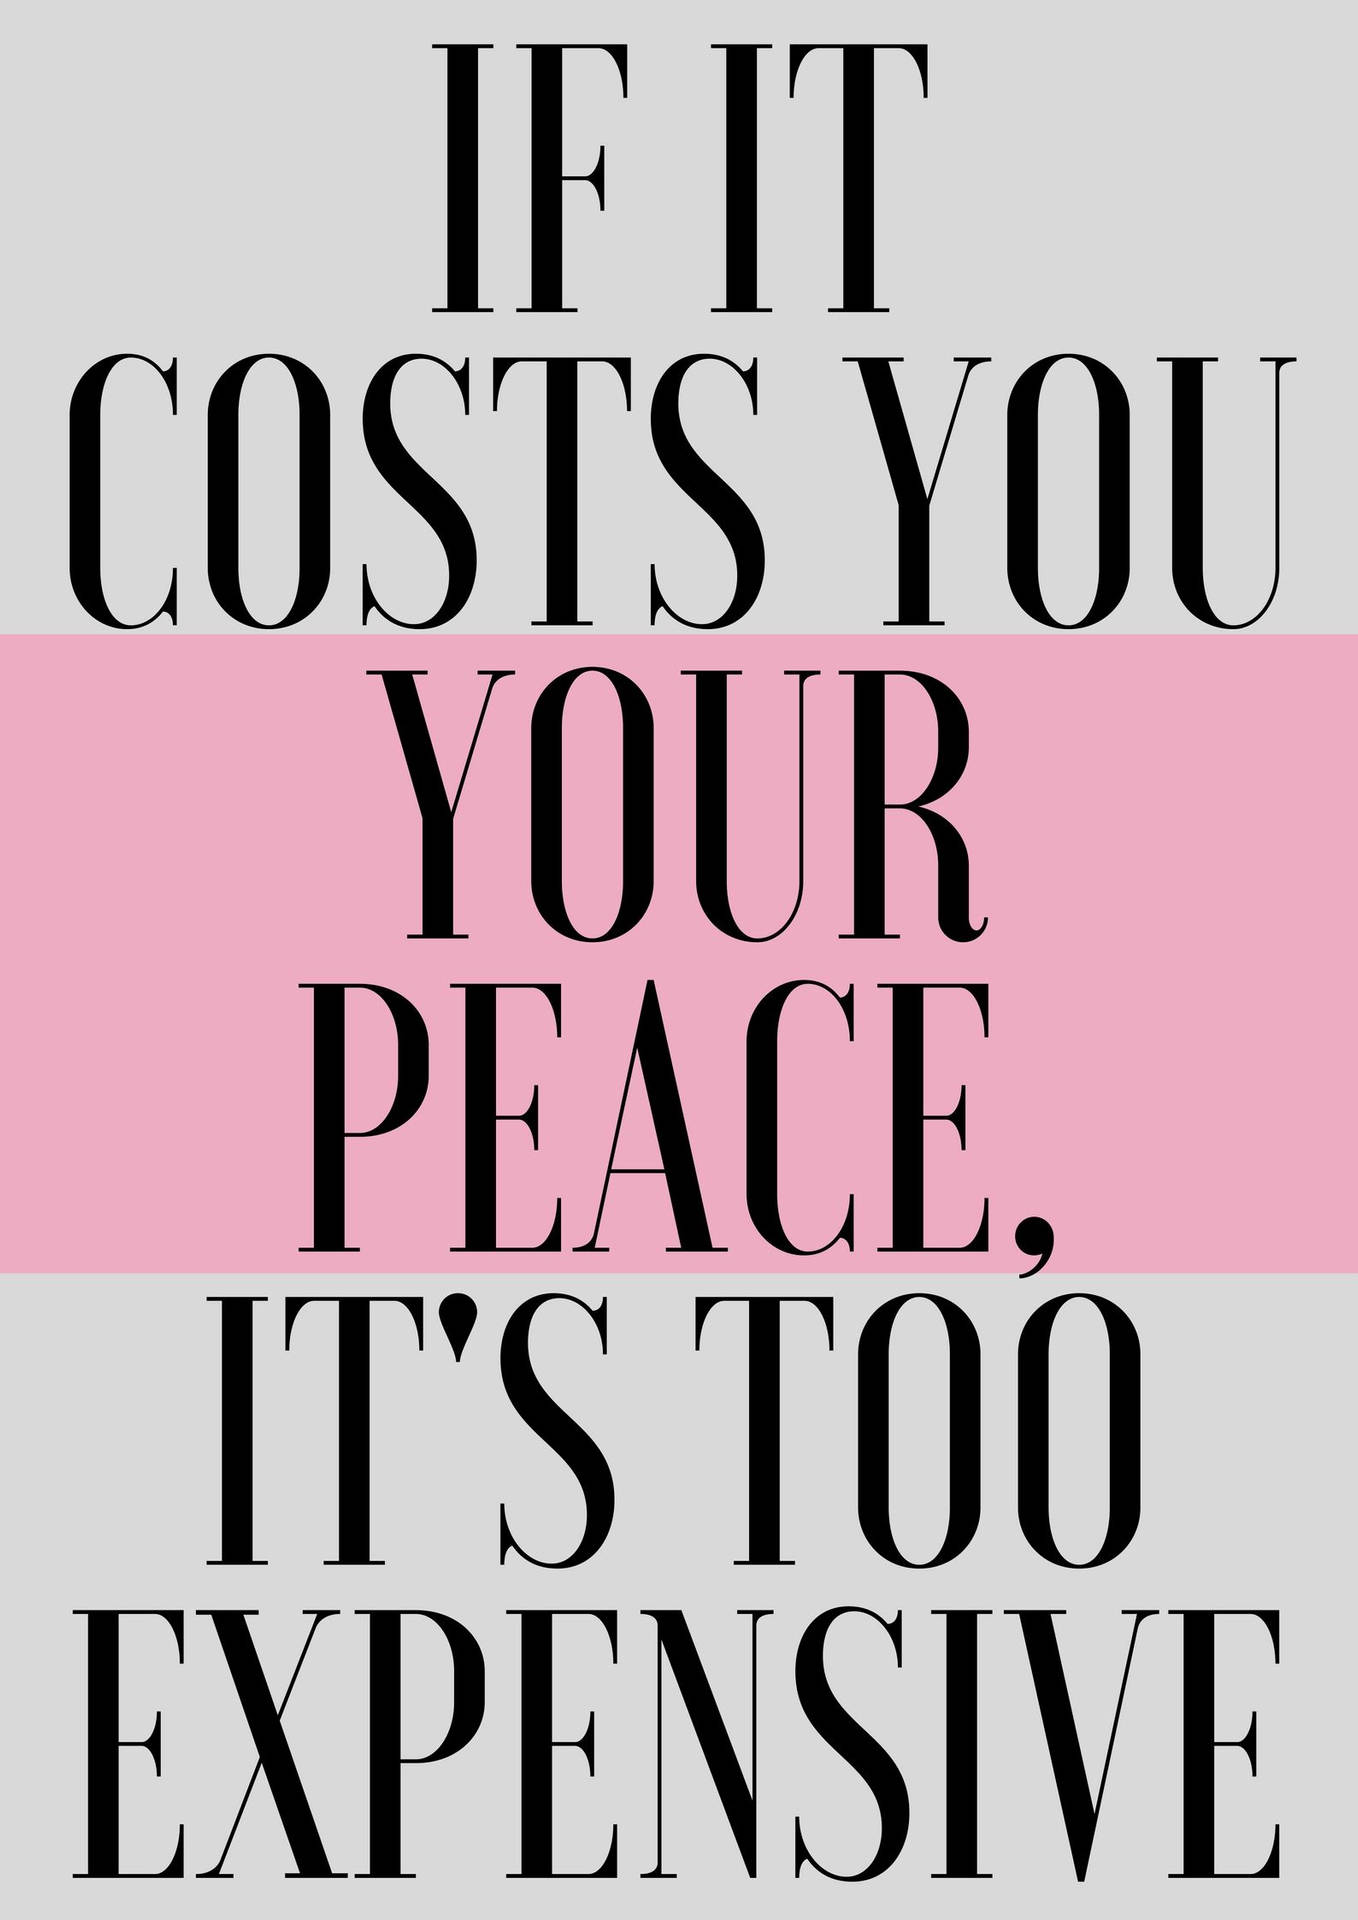 Costs Your Peace Quote Wallpaper